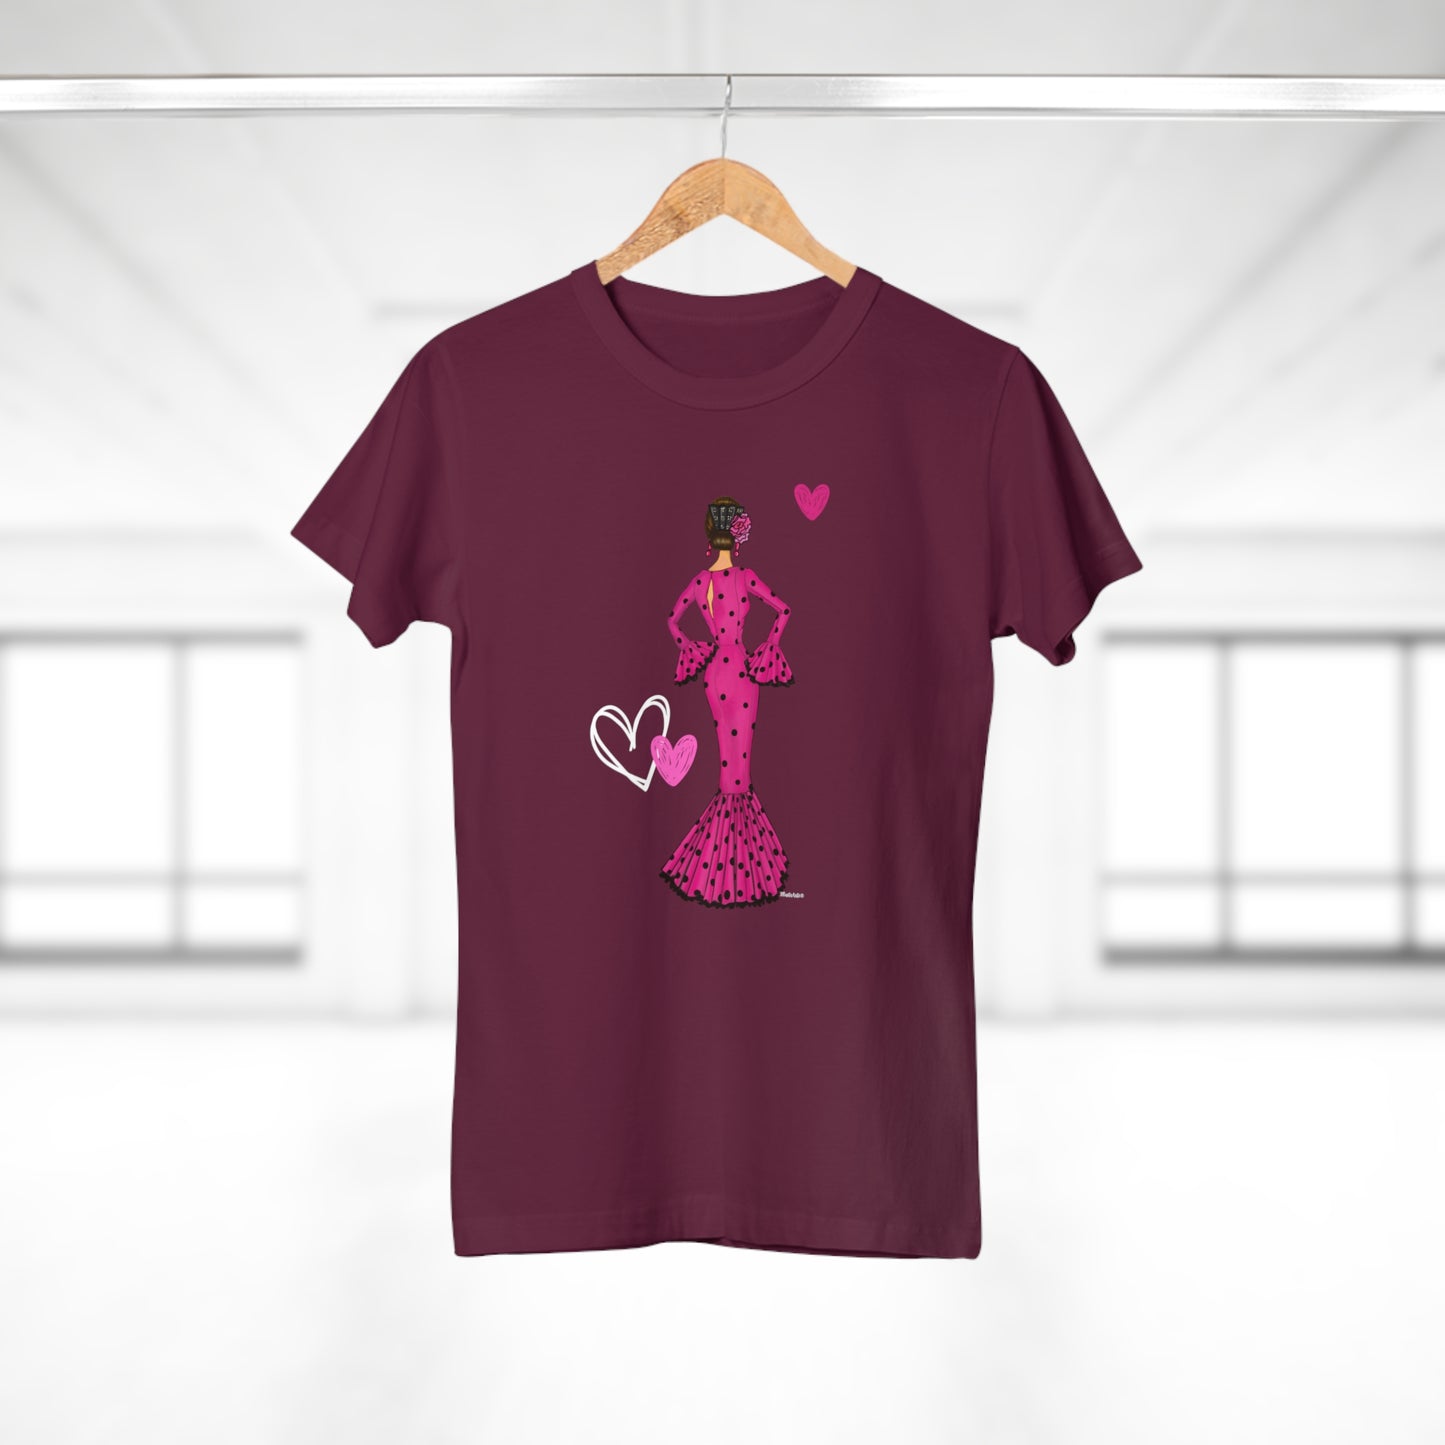 a t - shirt with a woman in a dress holding a heart